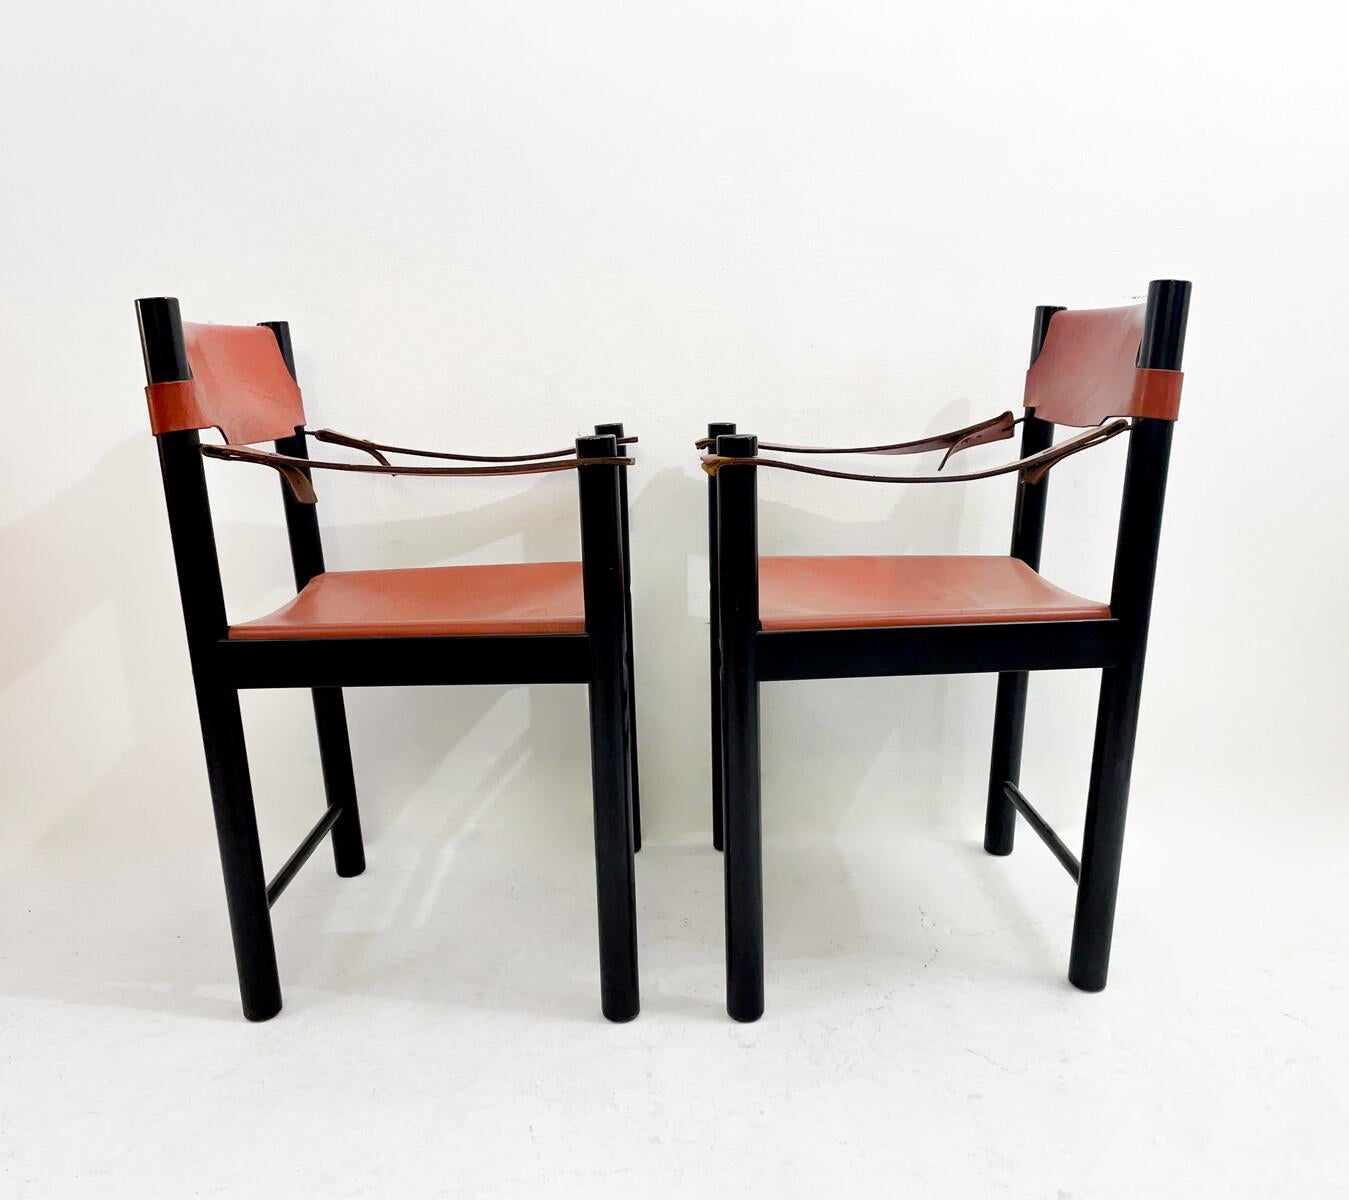 Mid-Century Modern Pair of Armchairs by Ibisco Sedie, Leather and Wood, Italy, 1960s - 2 Pairs available.